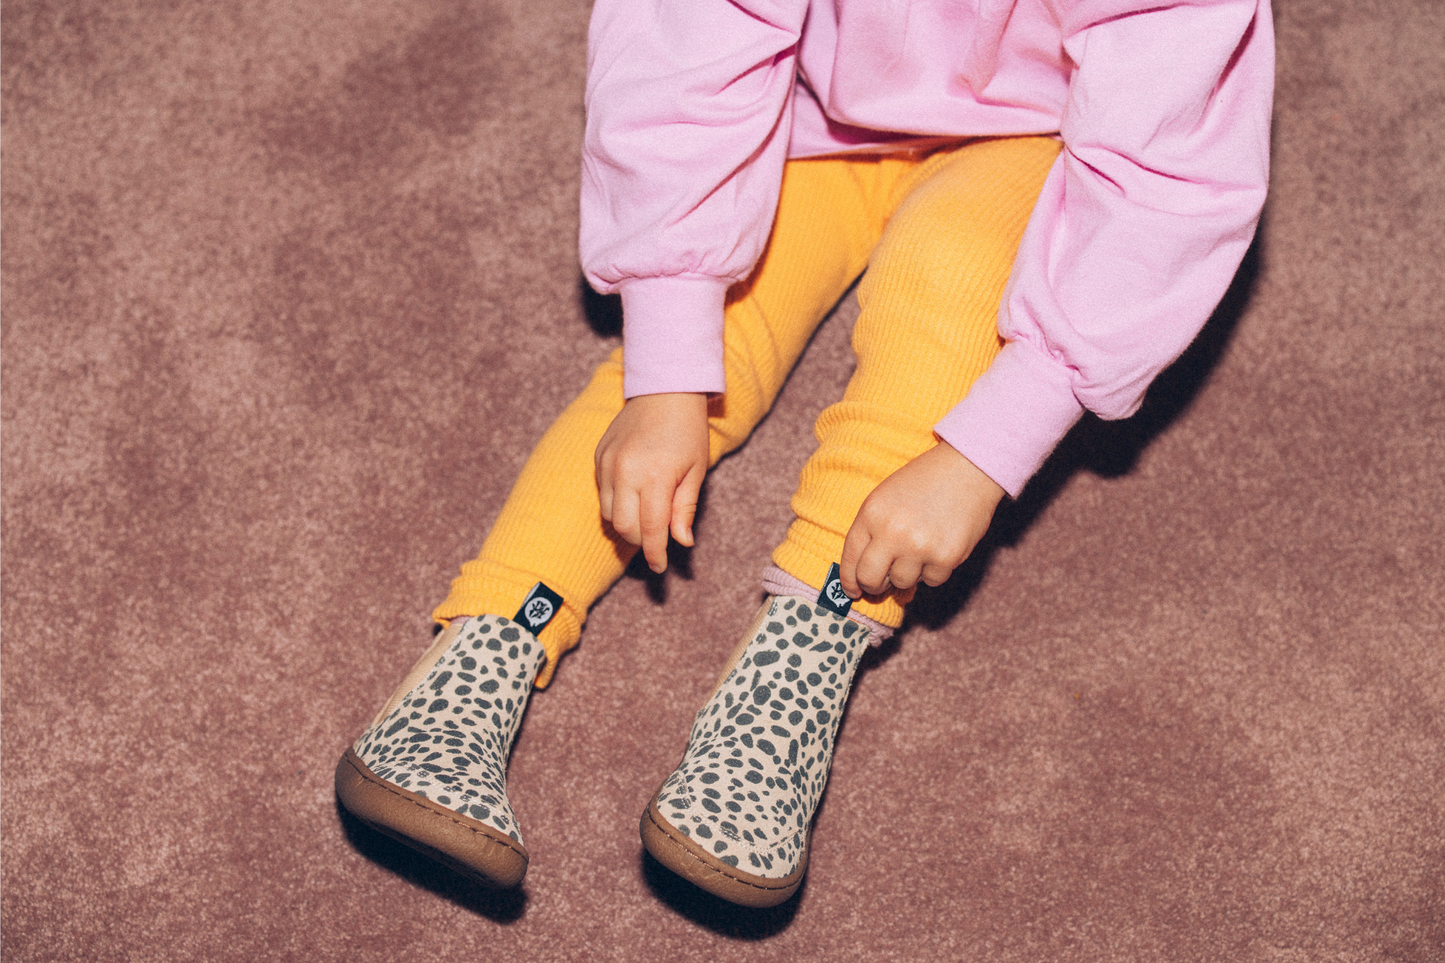 CHILD SITTING AND TOUCHING TAG ON CHEETAH BOOTS